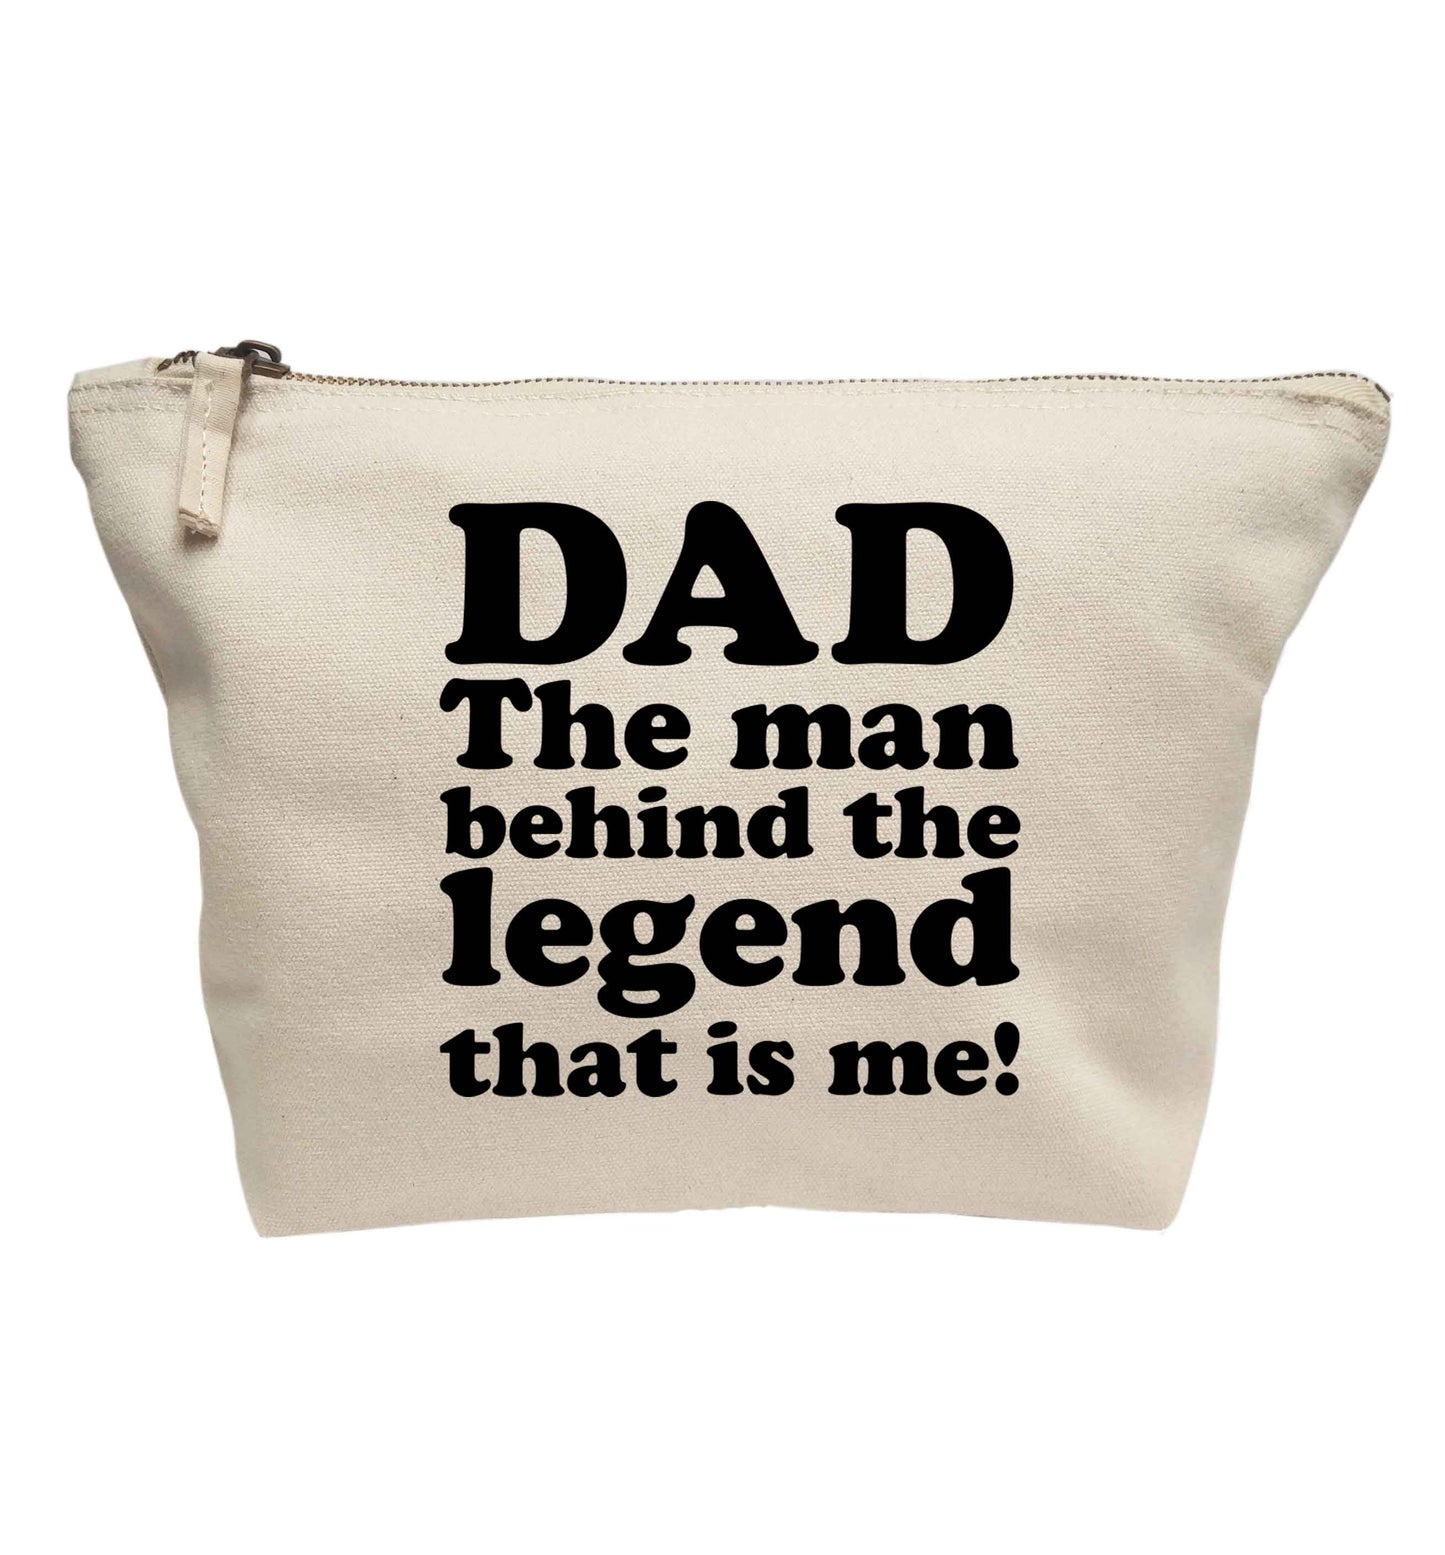 Dad the man behind the legend that is me | Makeup / wash bag